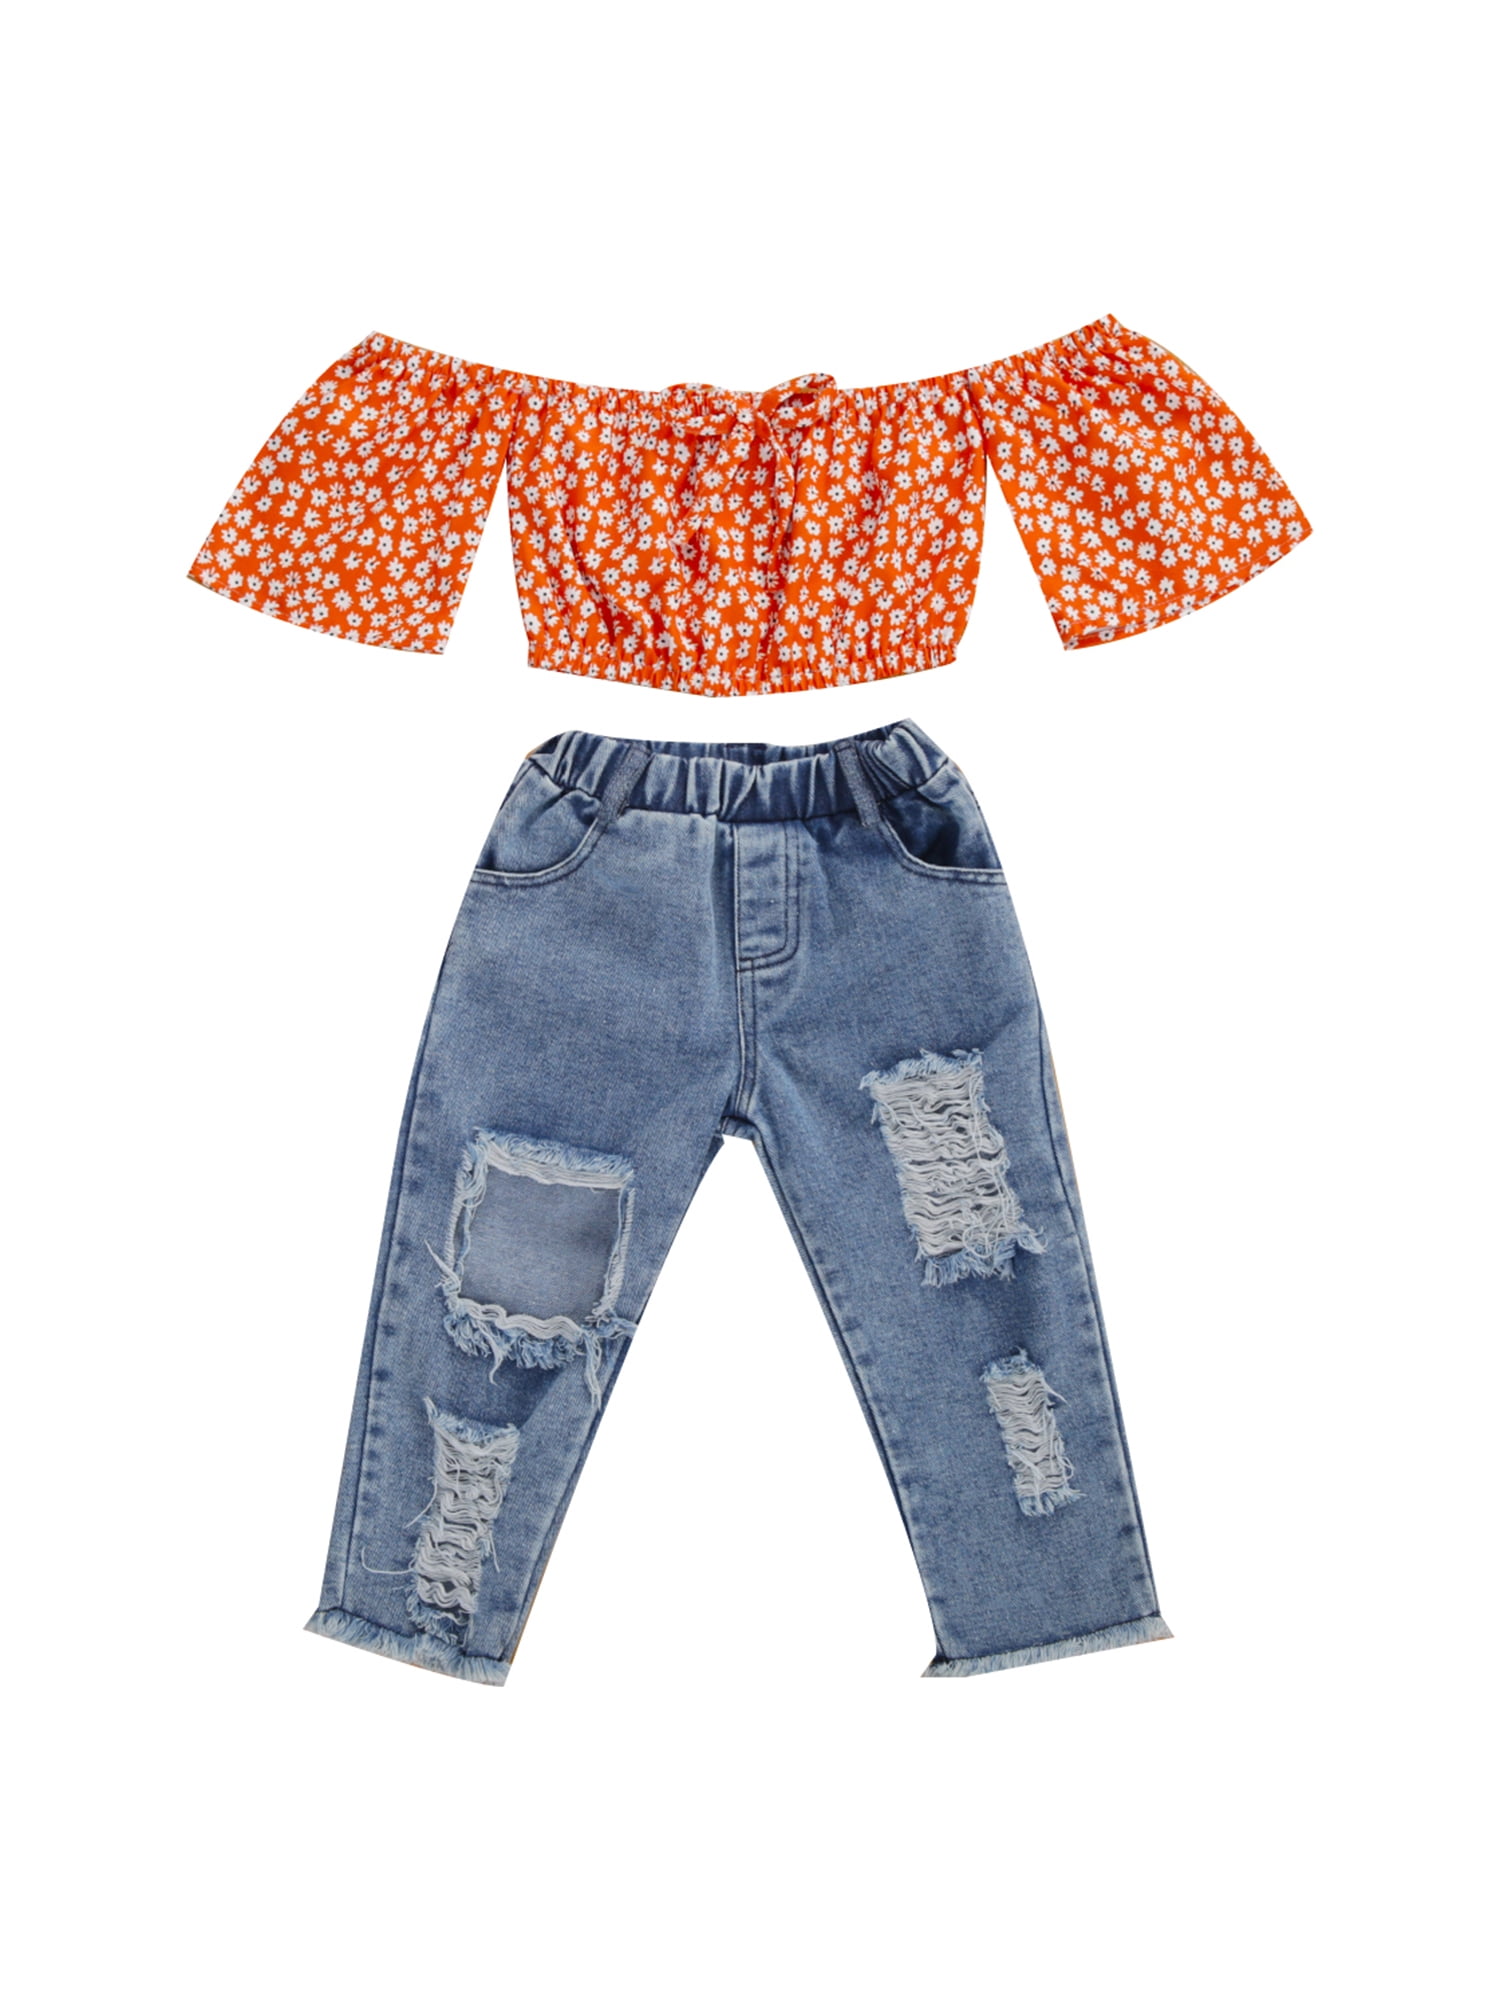 Baby Toddler Girl Off Shoulder Ruffle Tops & Ripped Jeans Hollow Denim Pants Outfits Clothes Set 